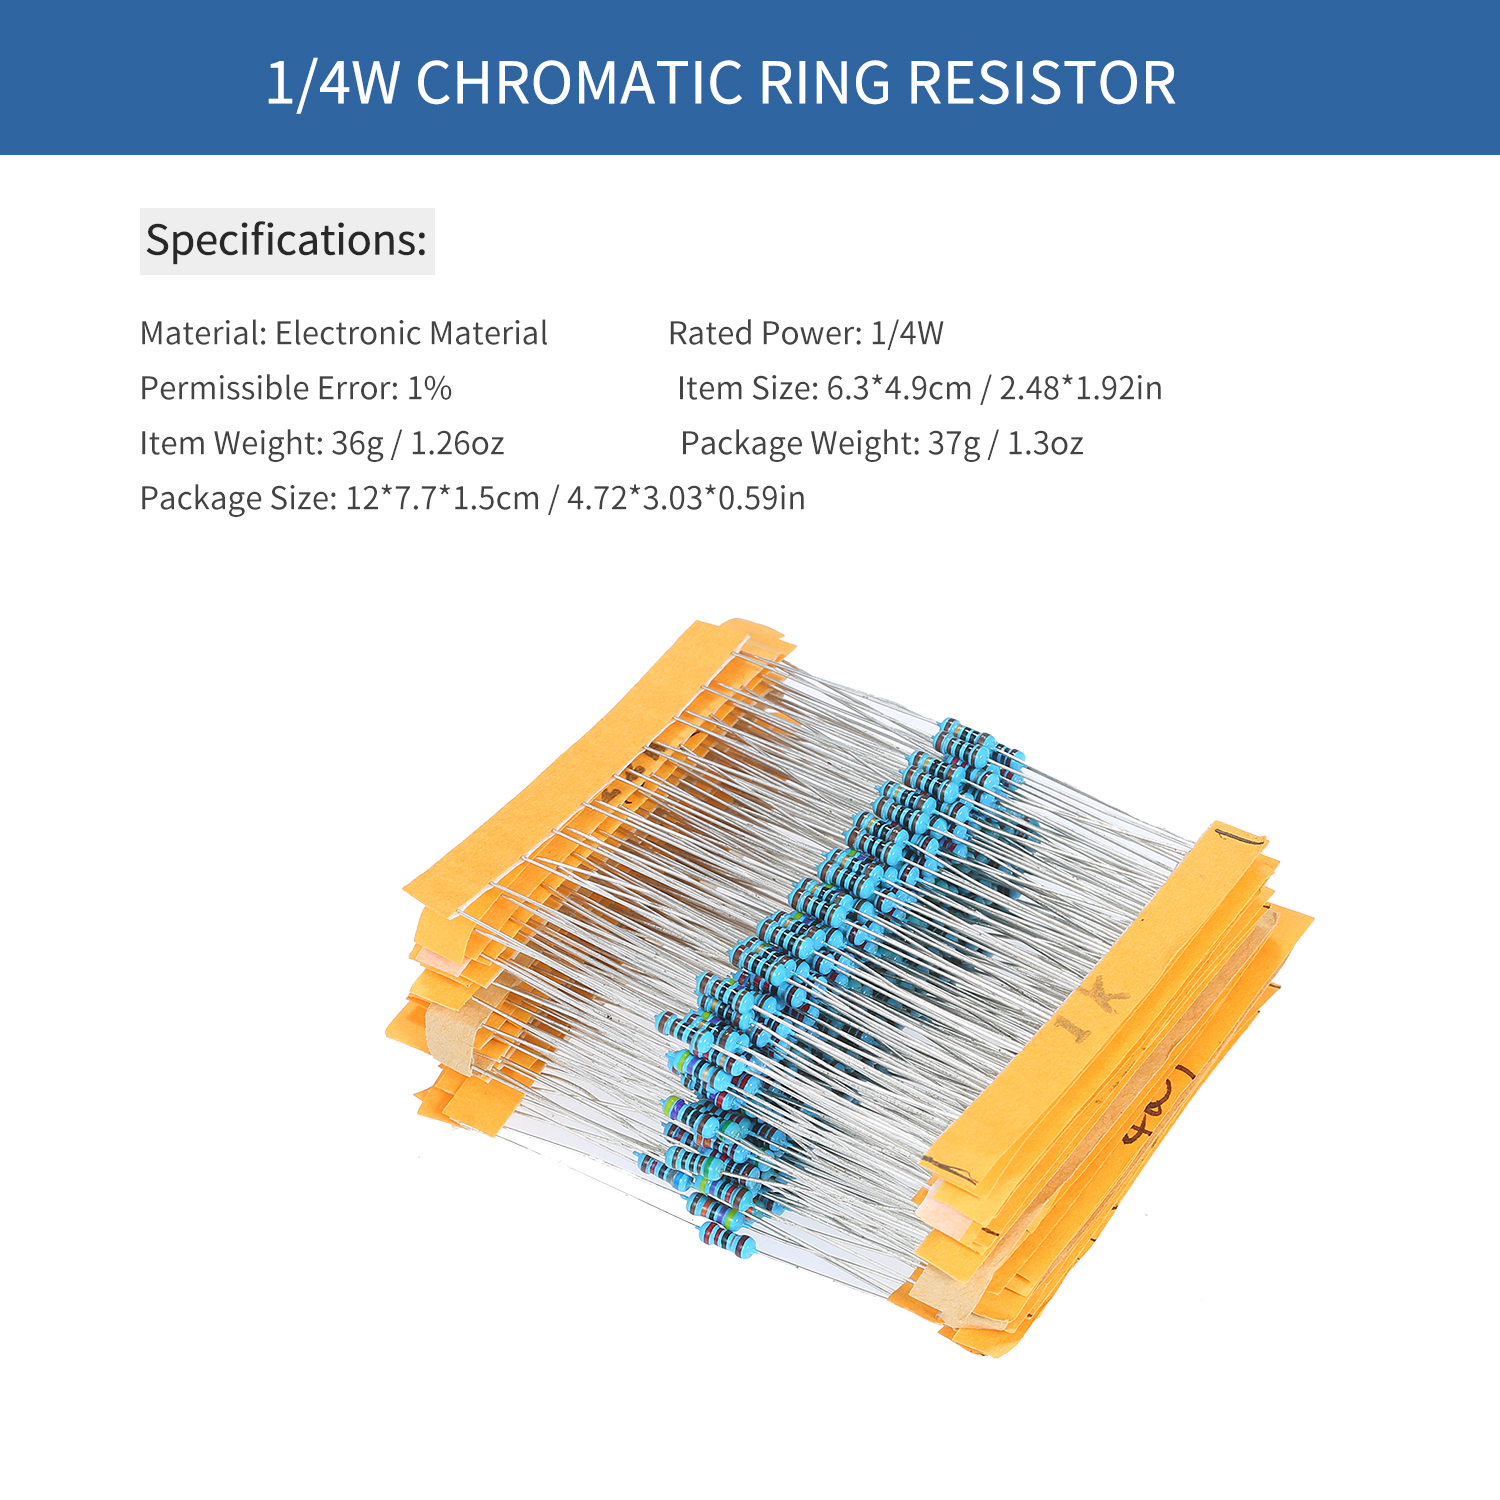 300PCS 1/4W Chromatic Ring Resistor Metal Film Resistor Assortment Kit with Permissible Error ±1% 30 Resistance Values 10/22/47/100/150/200/220/270/330/470/510/680 ohm 1/2/2.2/3.3/4.7/5.1/6.8/10/20/4 - image 4 of 7